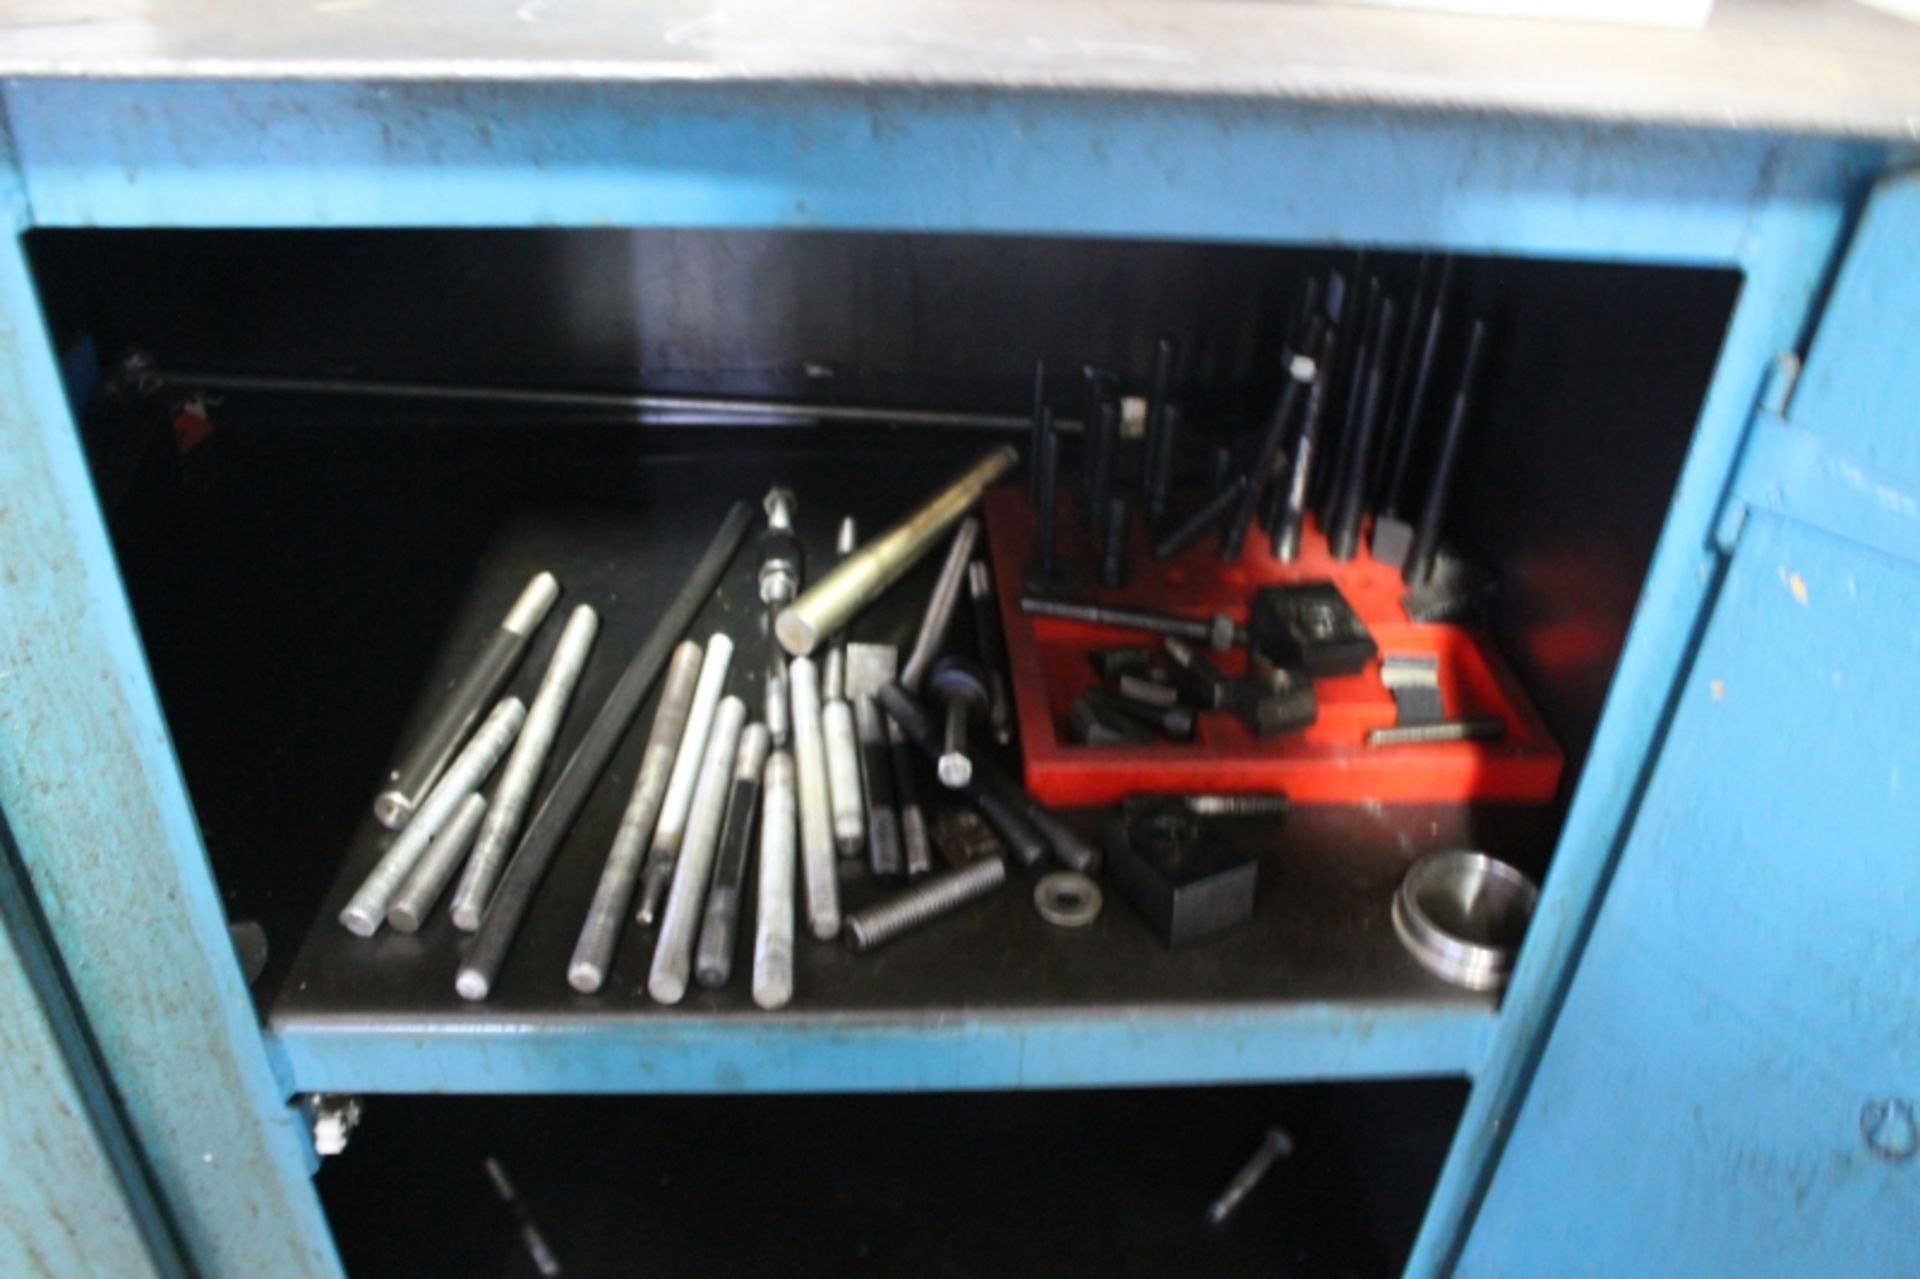 Work Bench with Content, Assorted Drills, Taps, Sleeves Magnets, & Hardware - Image 7 of 7